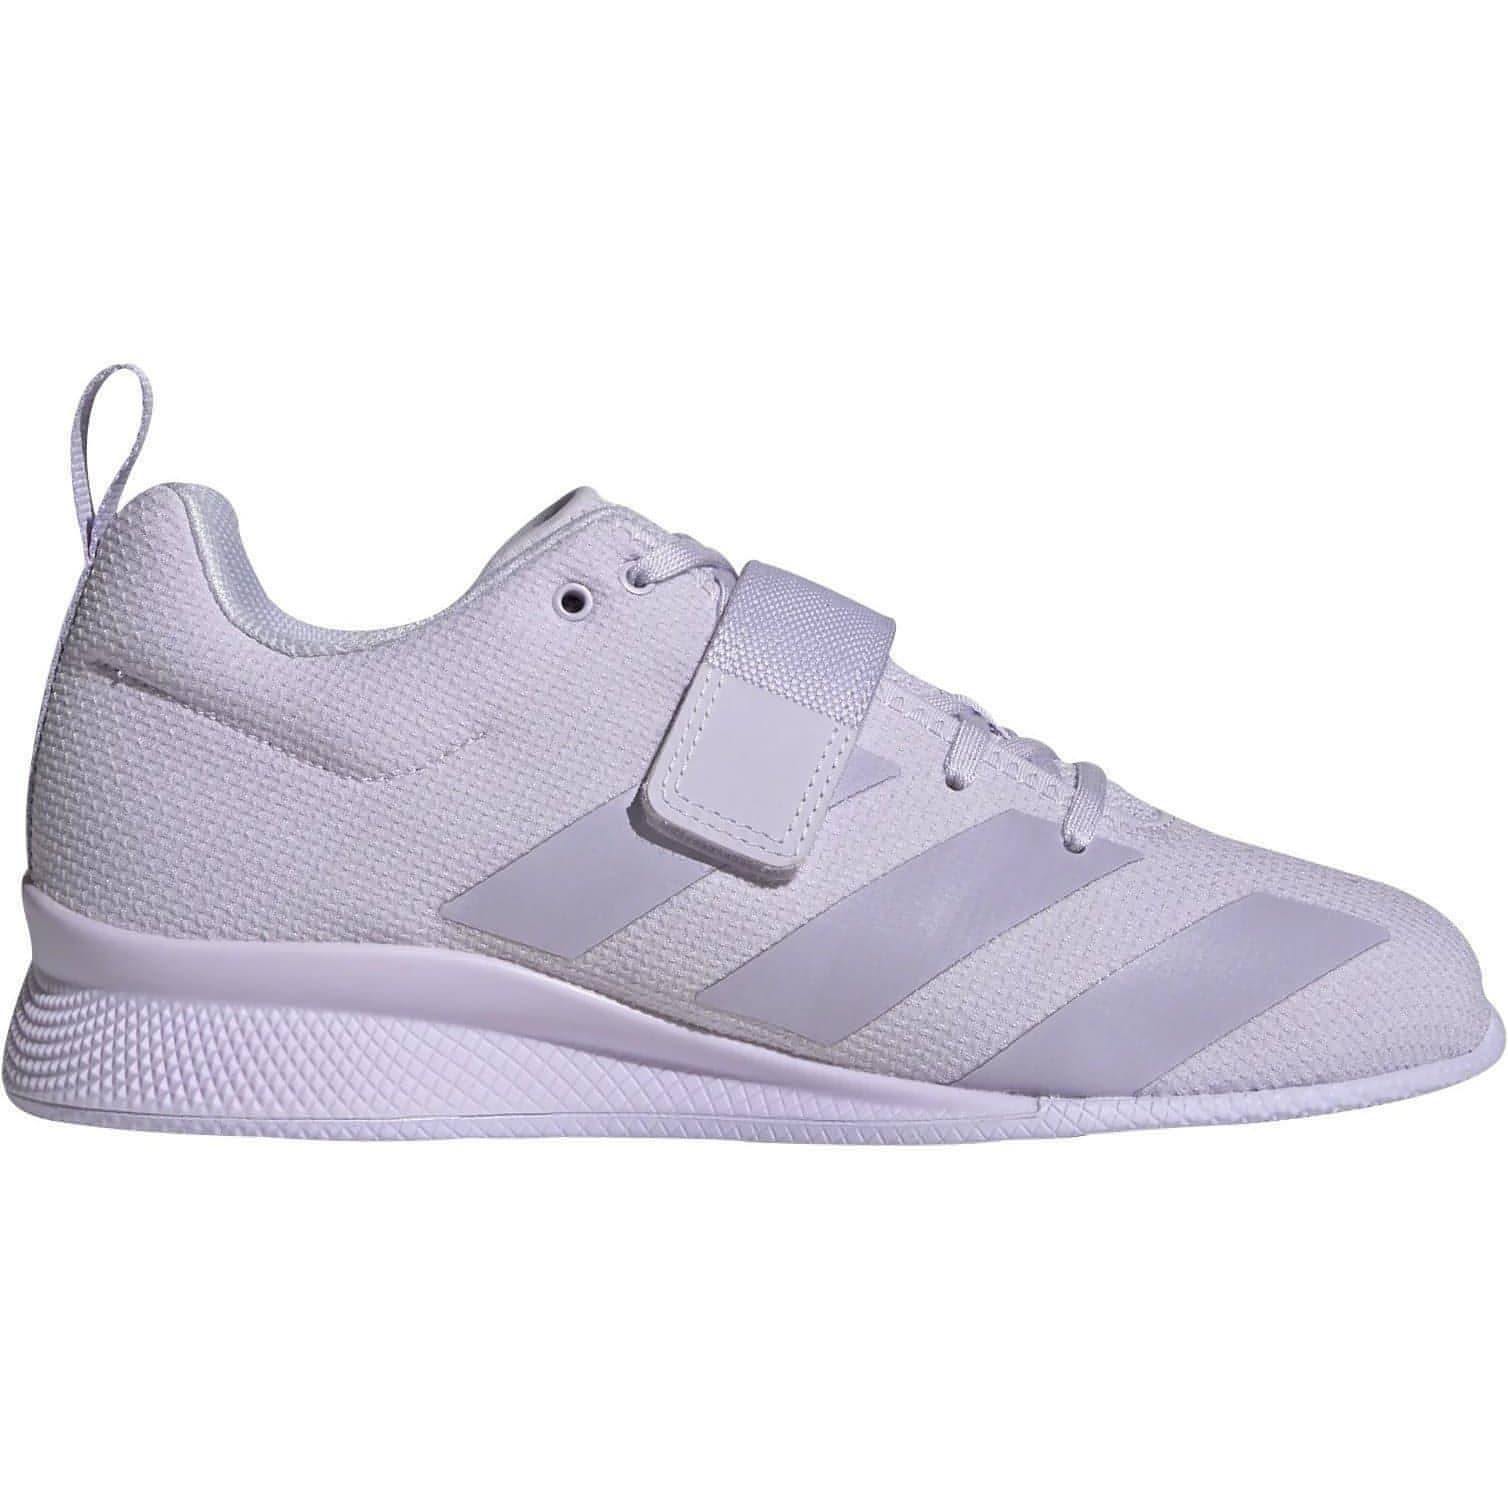 adidas AdiPower 2 Womens Weightlifting Shoes - Purple